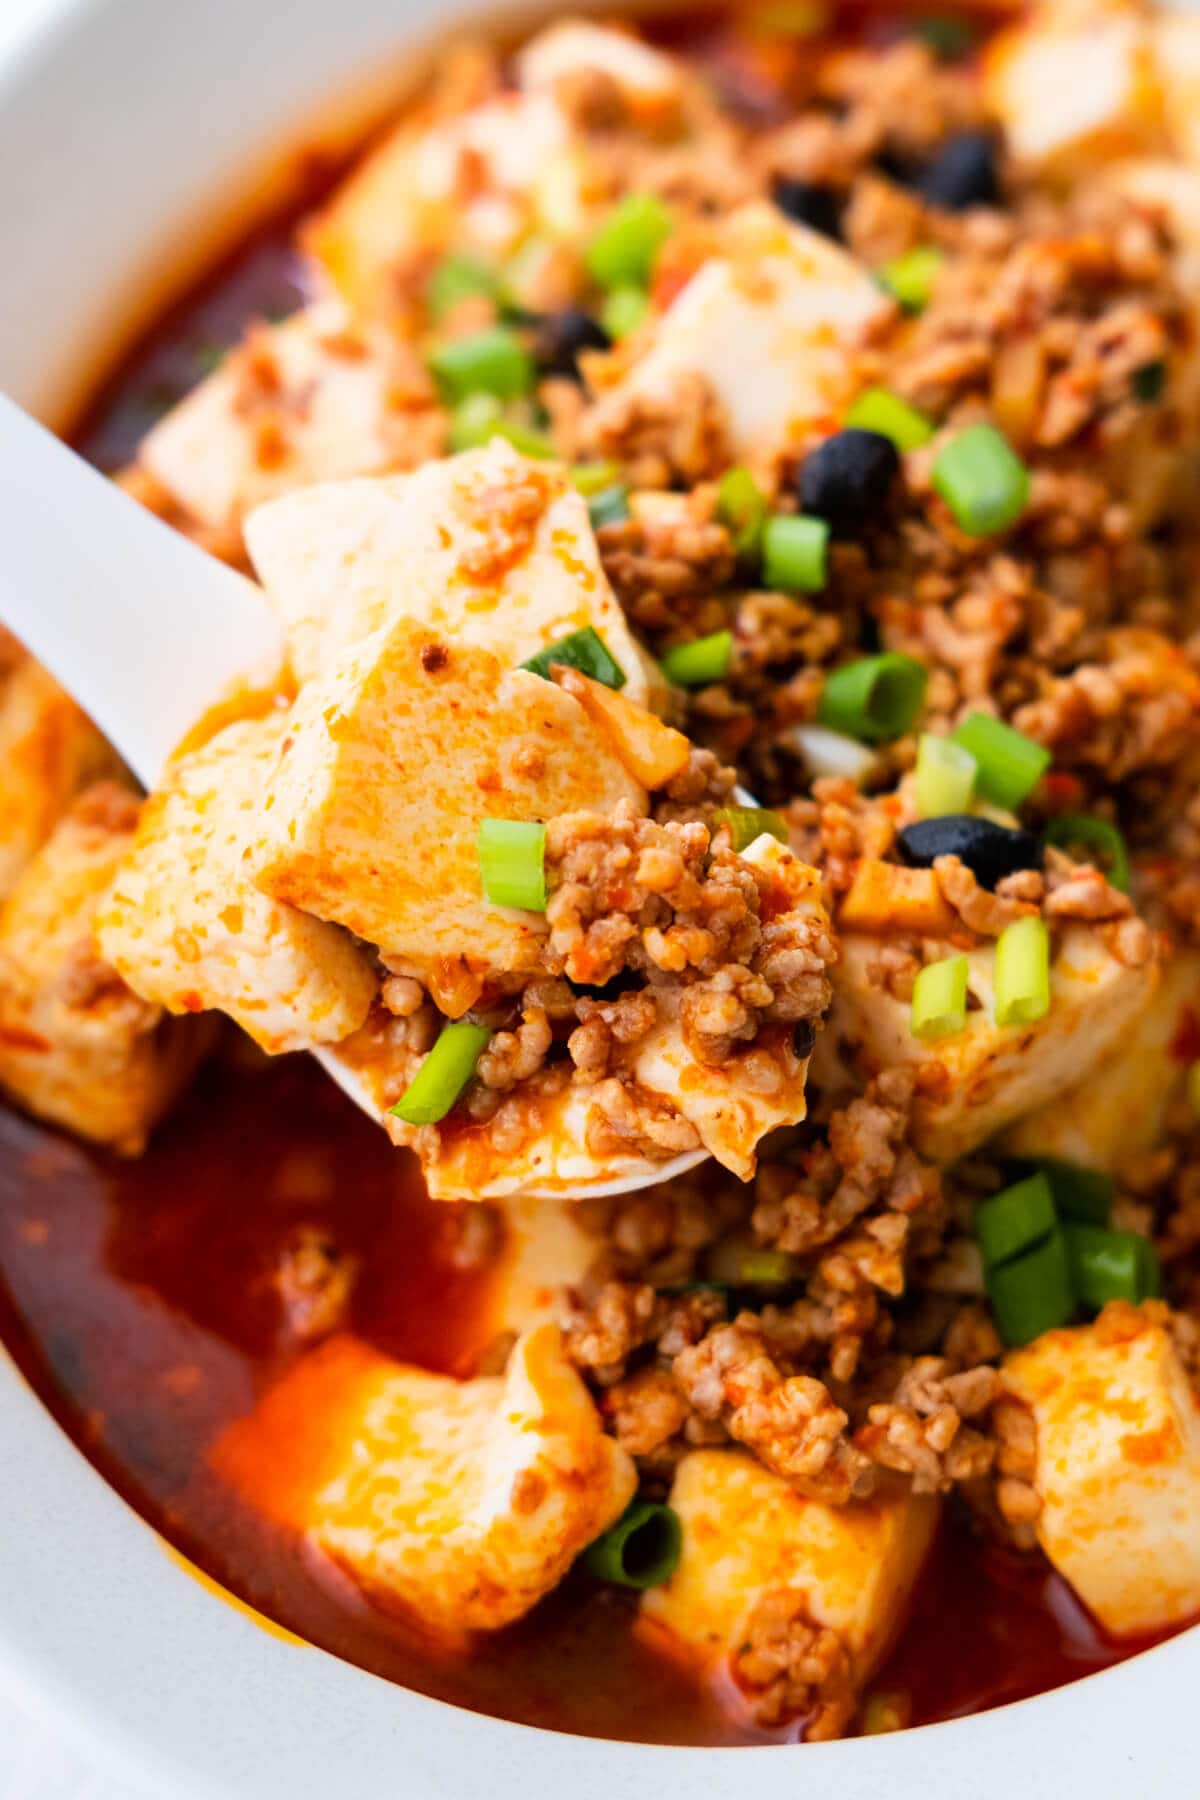 Numbing spicy mapo tofu with delicious tofu and meat.